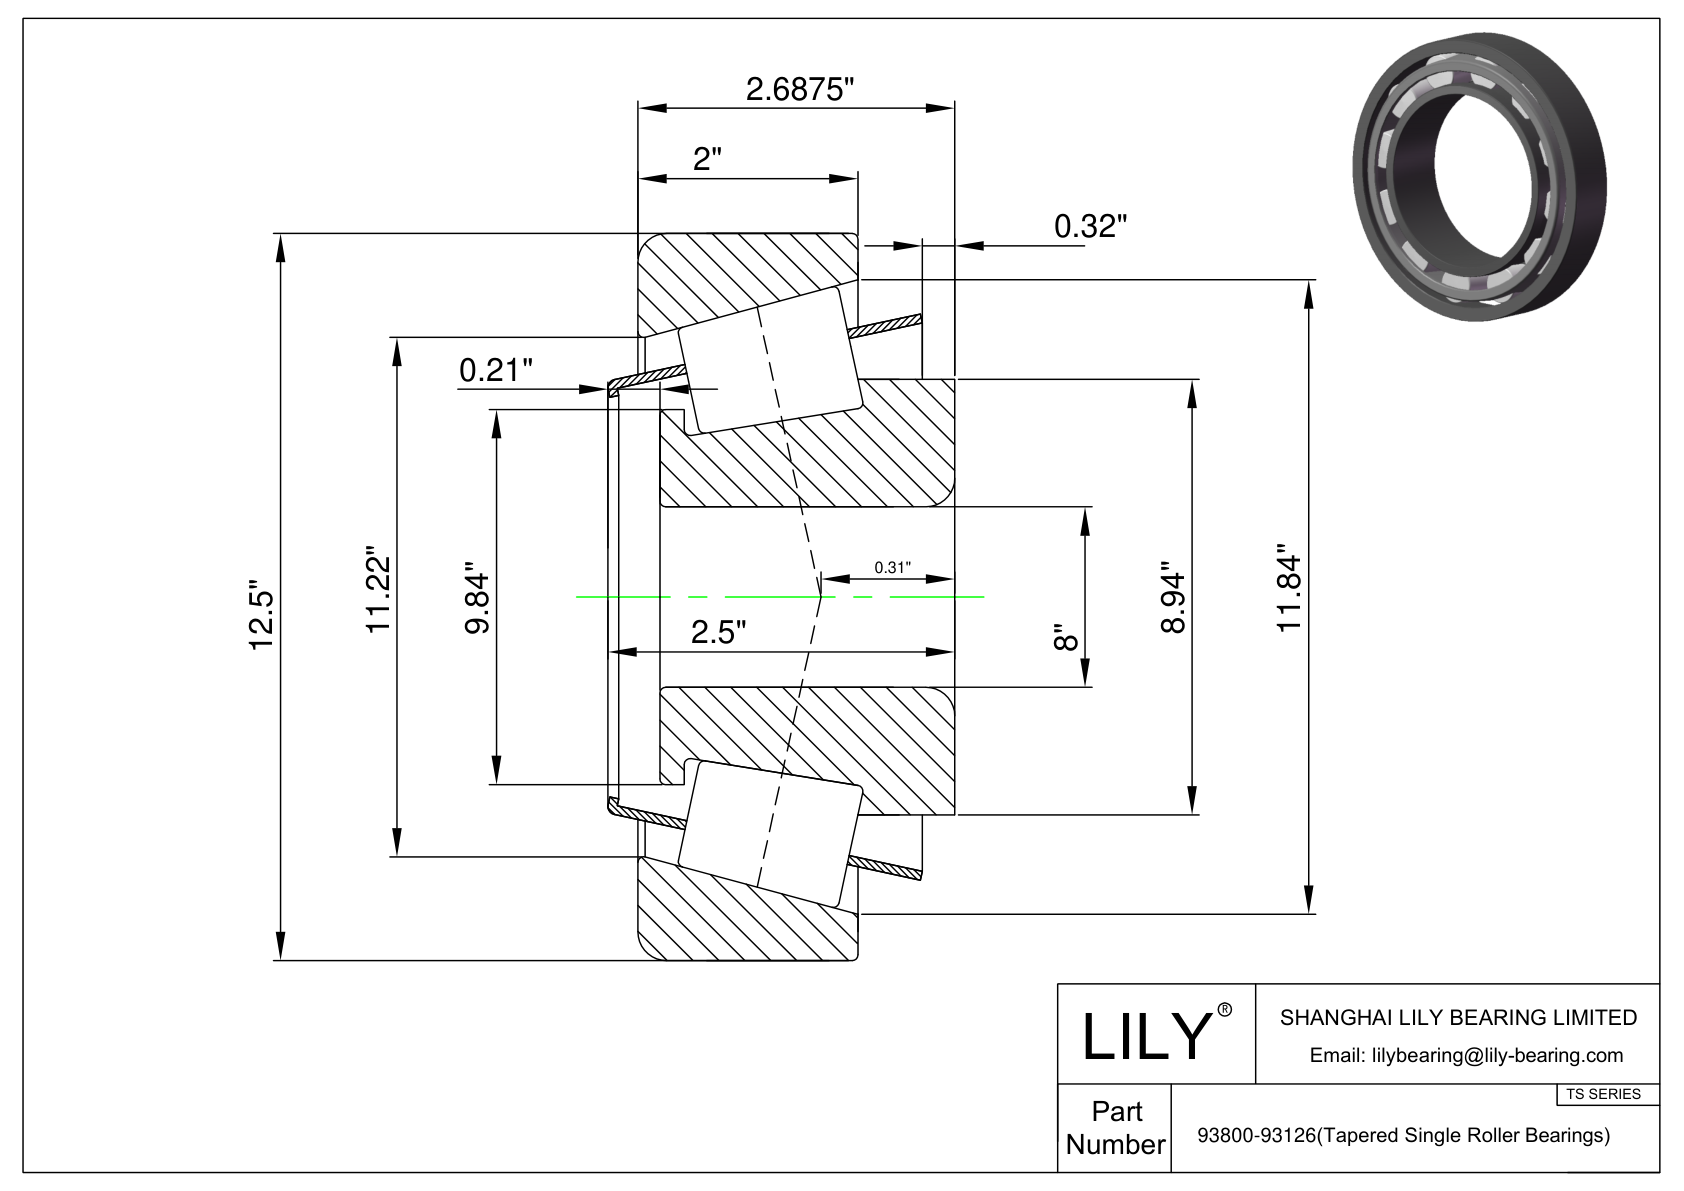 93800-93126 TS (Tapered Single Roller Bearings) (Imperial) cad drawing